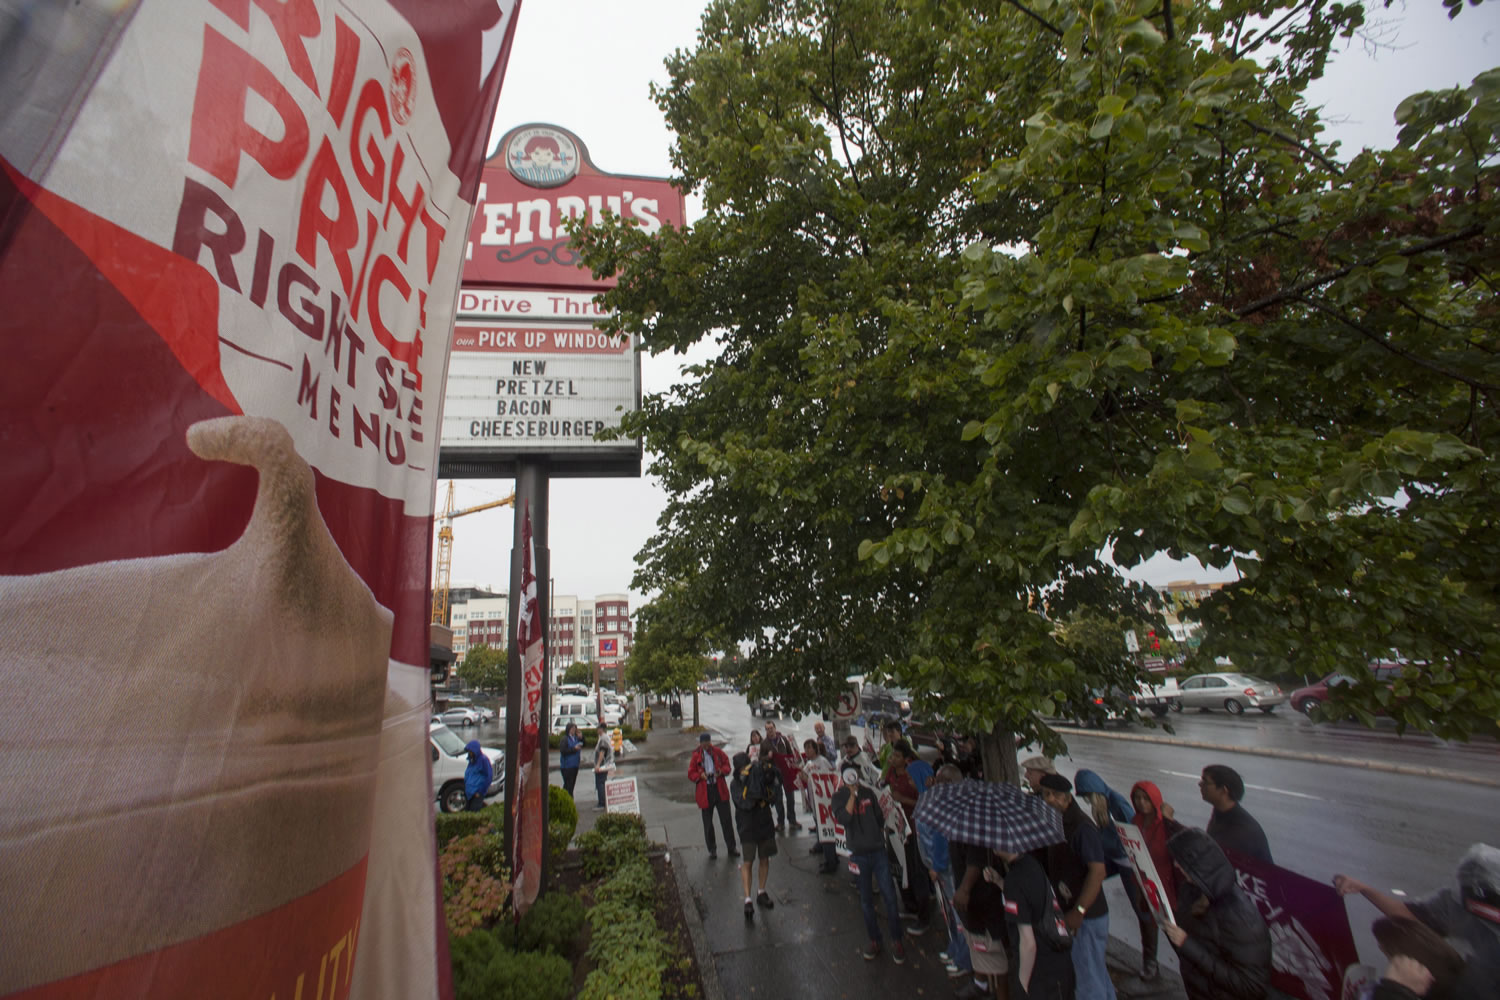 Fast-food workers and others protest Thursday at the Wendy's in Seattle's Ballard neighborhood, calling for the minimum wage to be raised to $15 an hour.